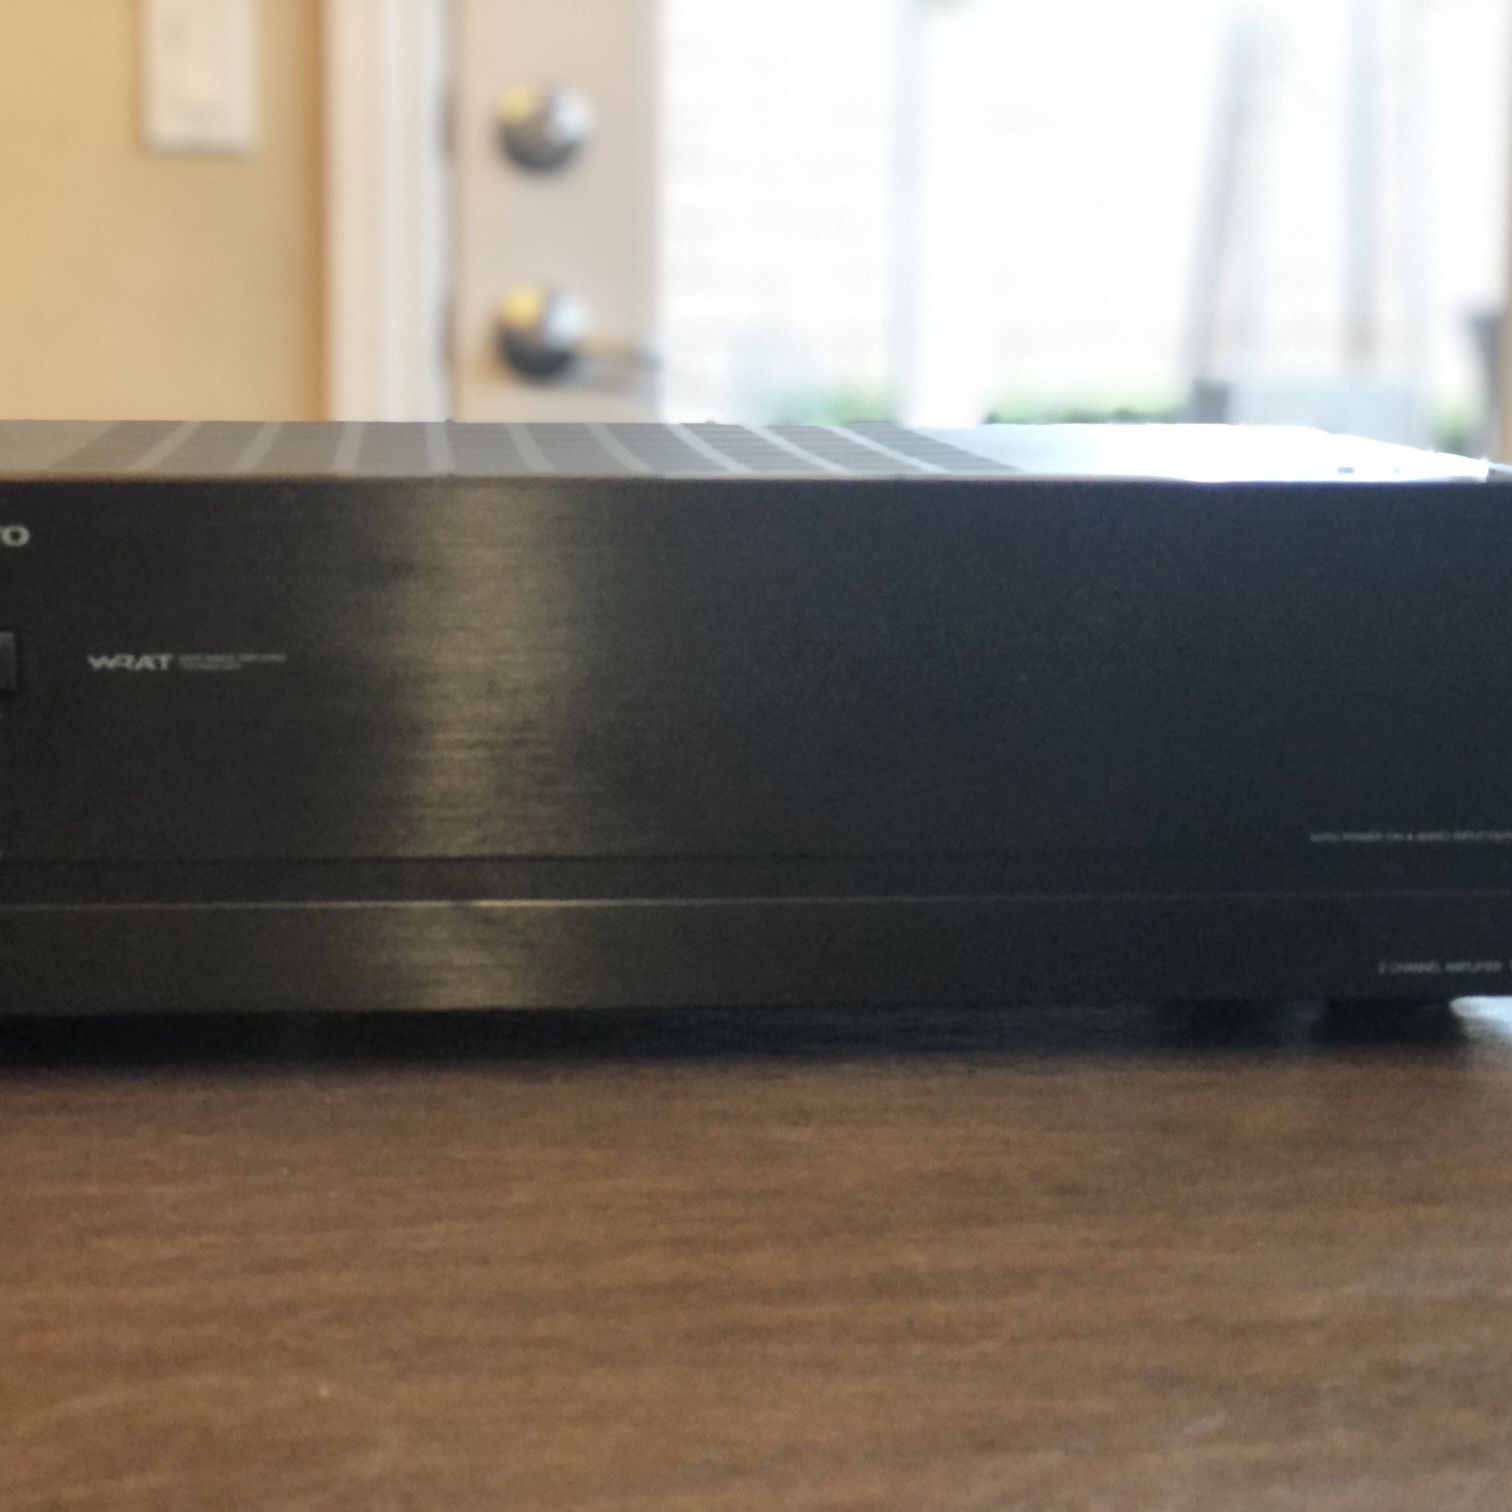 Onkyo M-282 2 Channel Amplifier. New Condition!